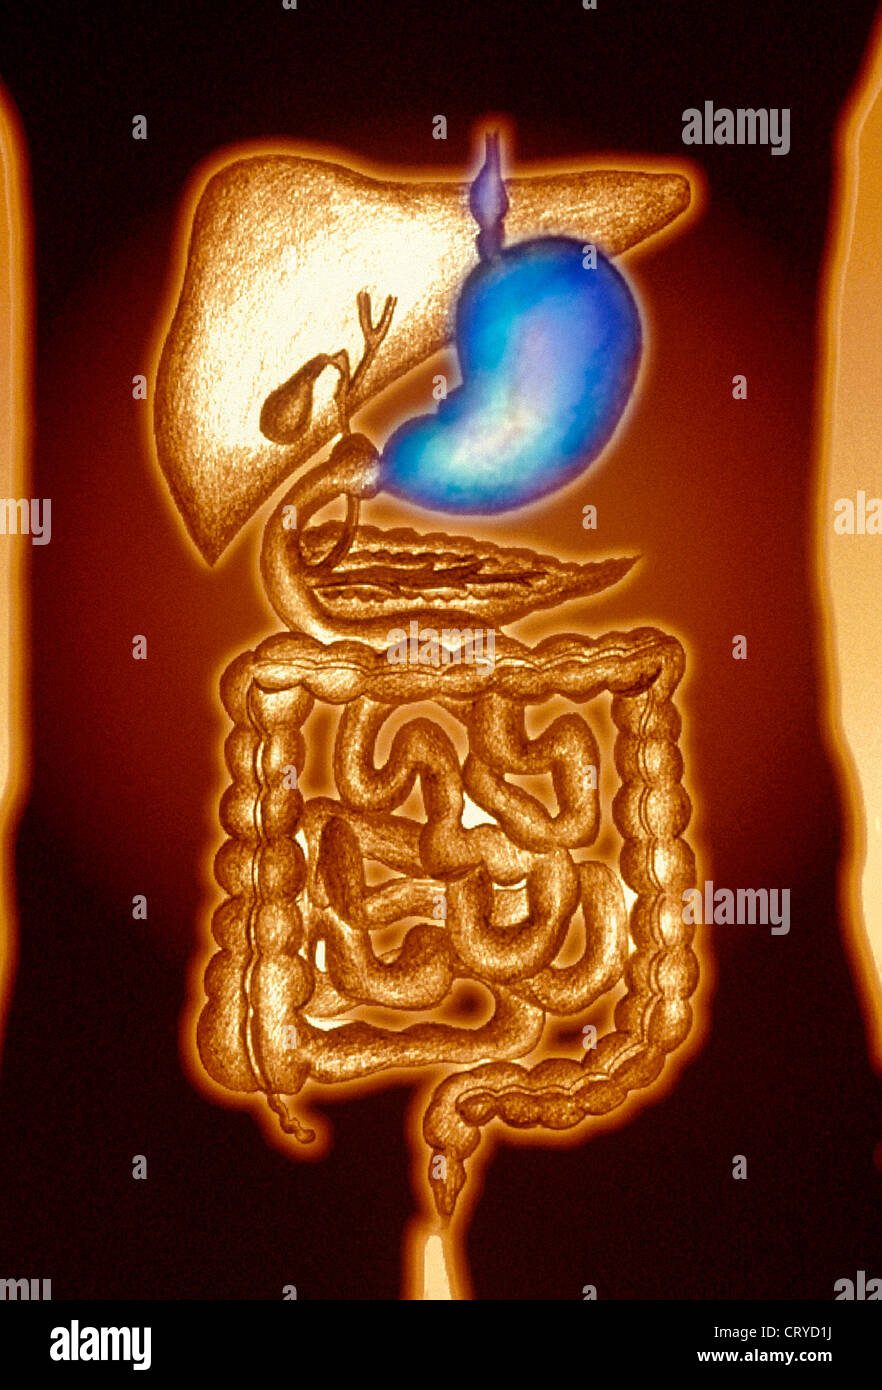 STOMACH, DRAWING Stock Photo